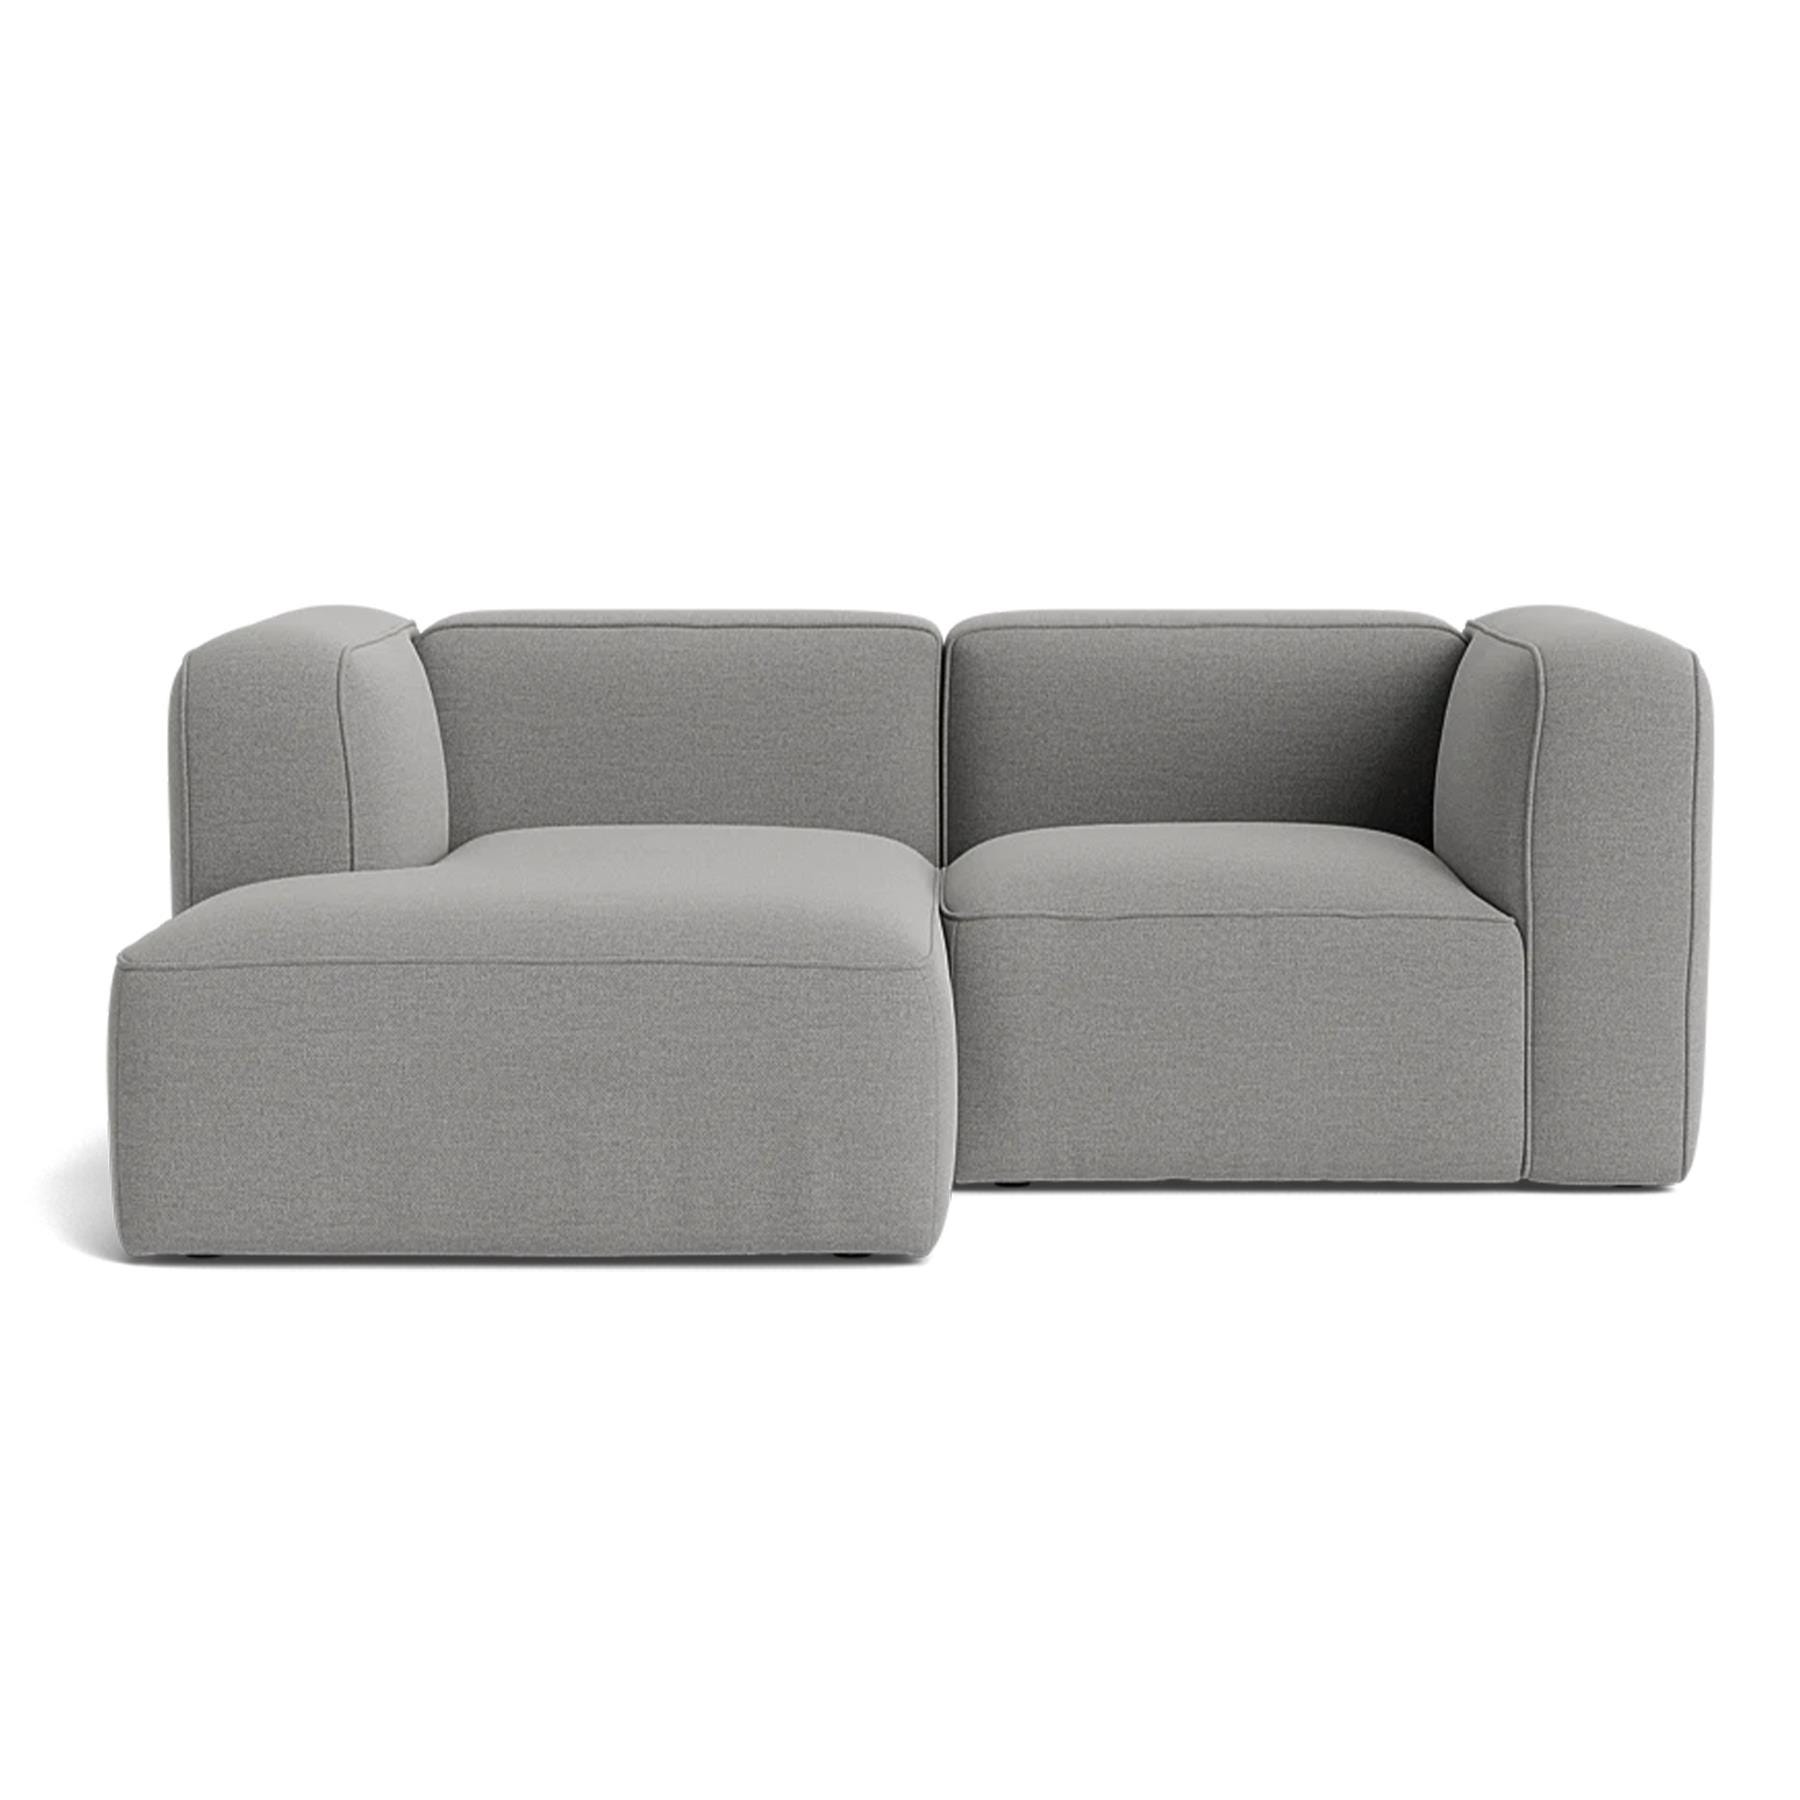 Make Nordic Basecamp Small Sofa Rewool 128 Left Grey Designer Furniture From Holloways Of Ludlow